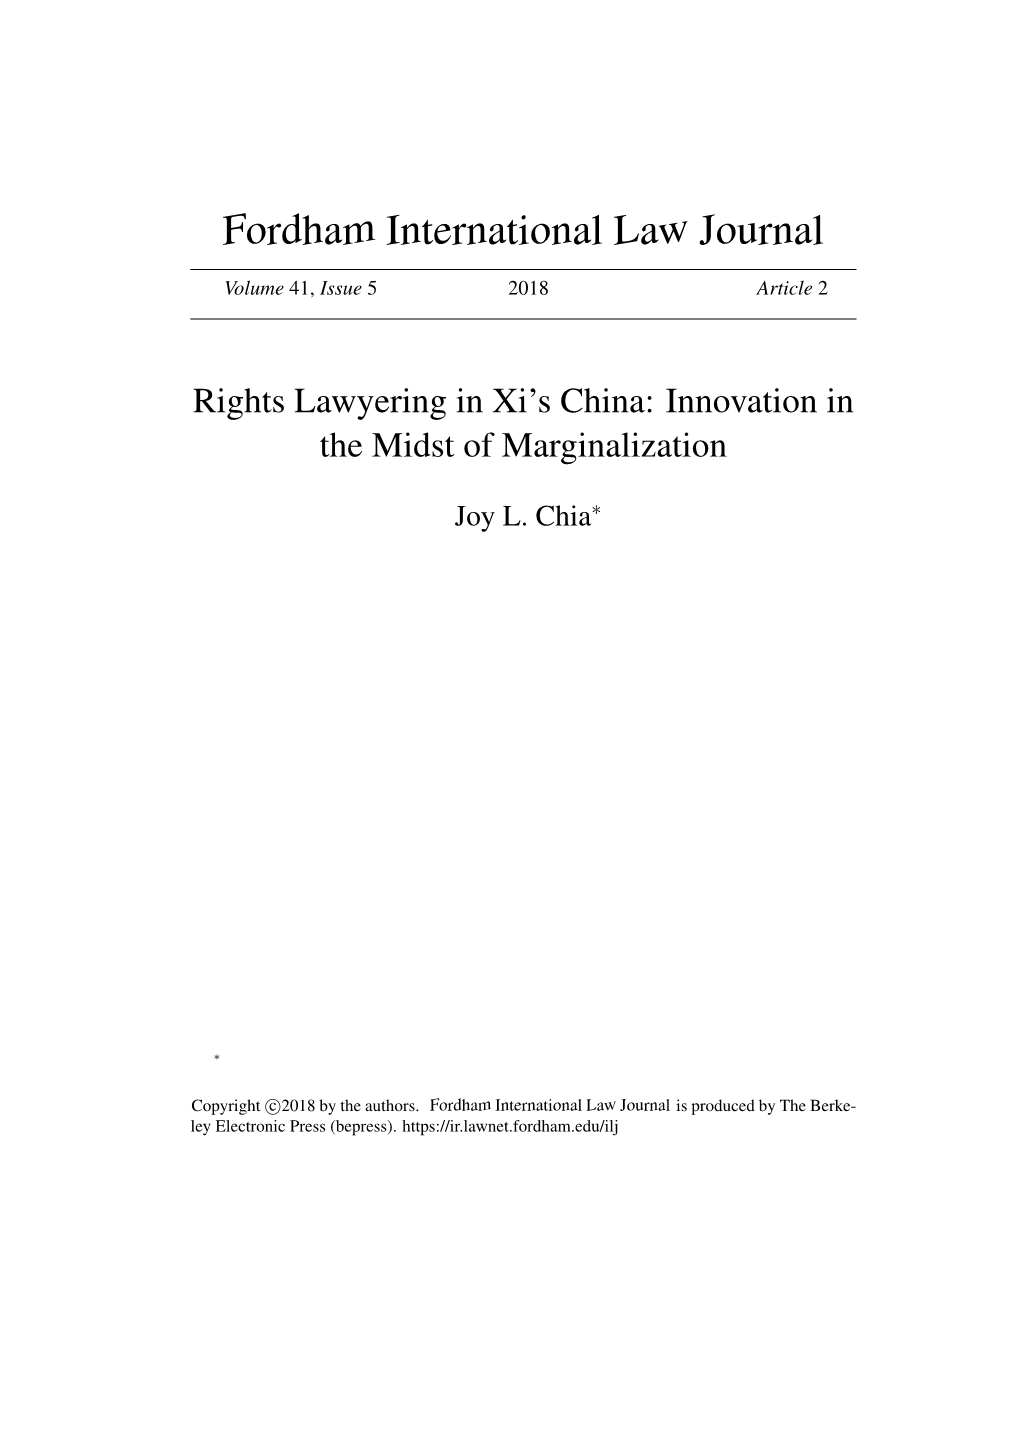 Rights Lawyering in Xi's China